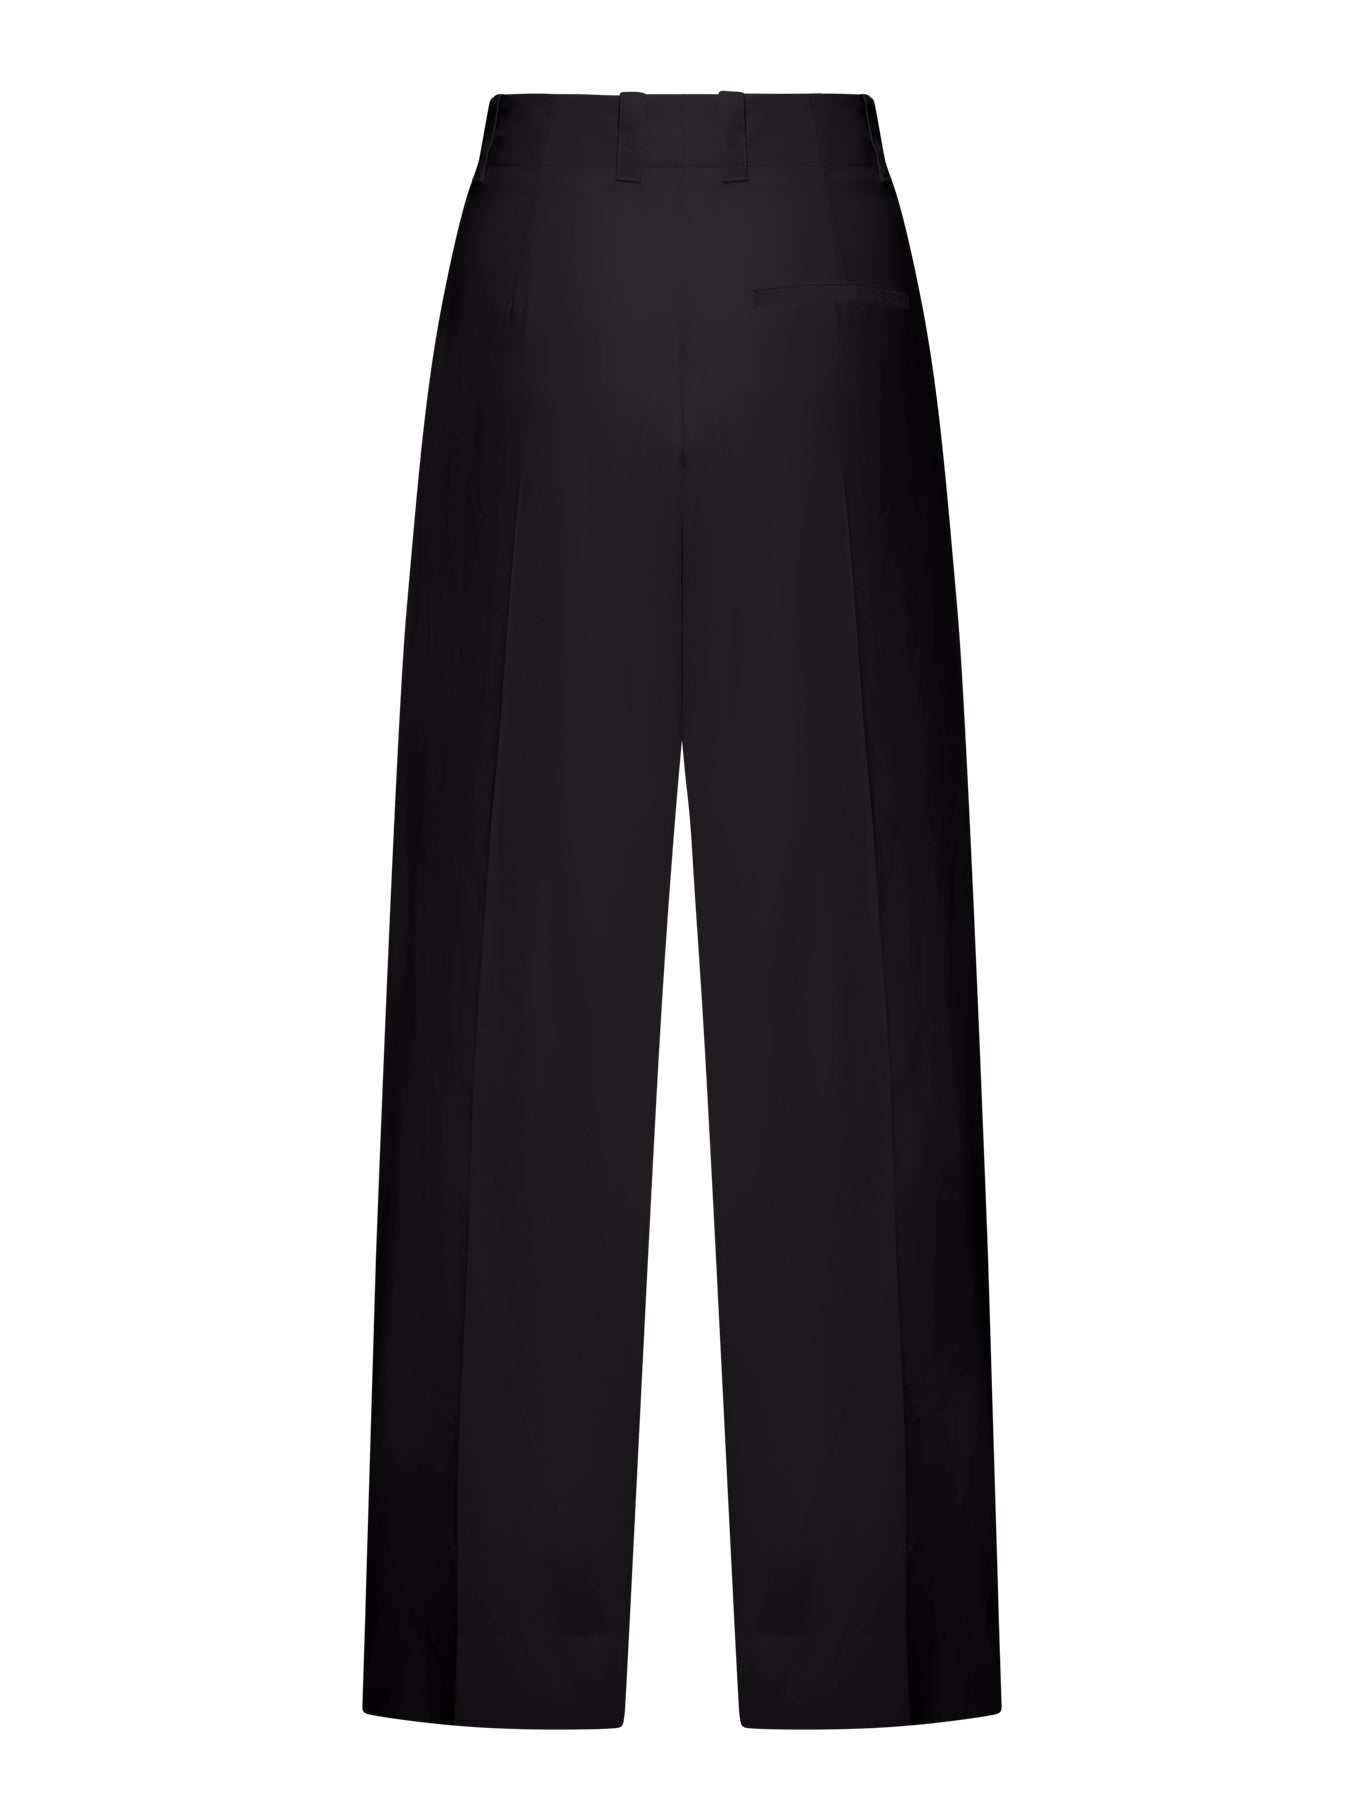 Silk and cotton trousers